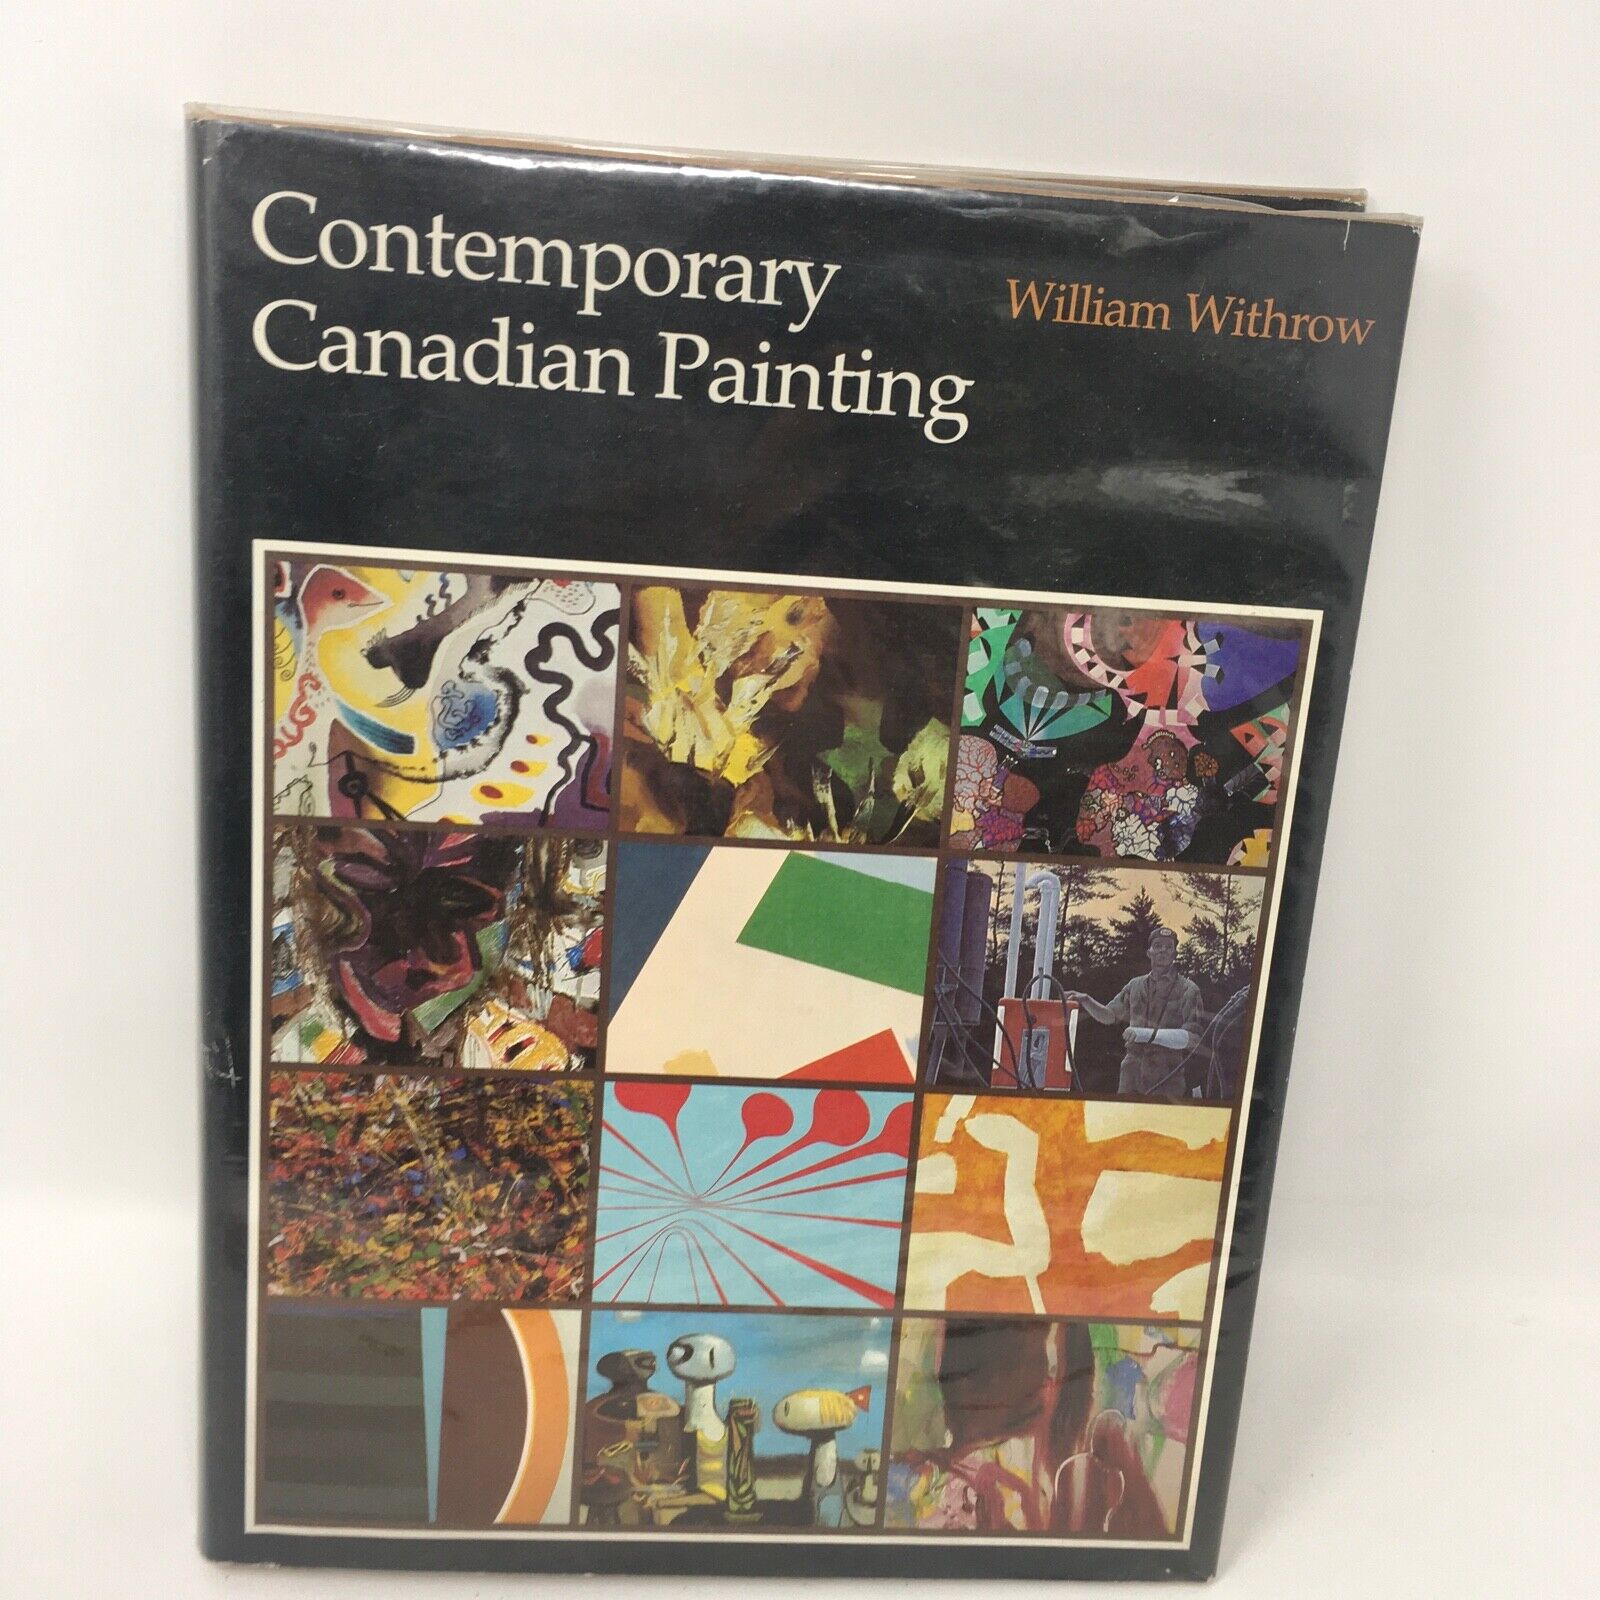 Contemporary Canadian Painting by William Withrow